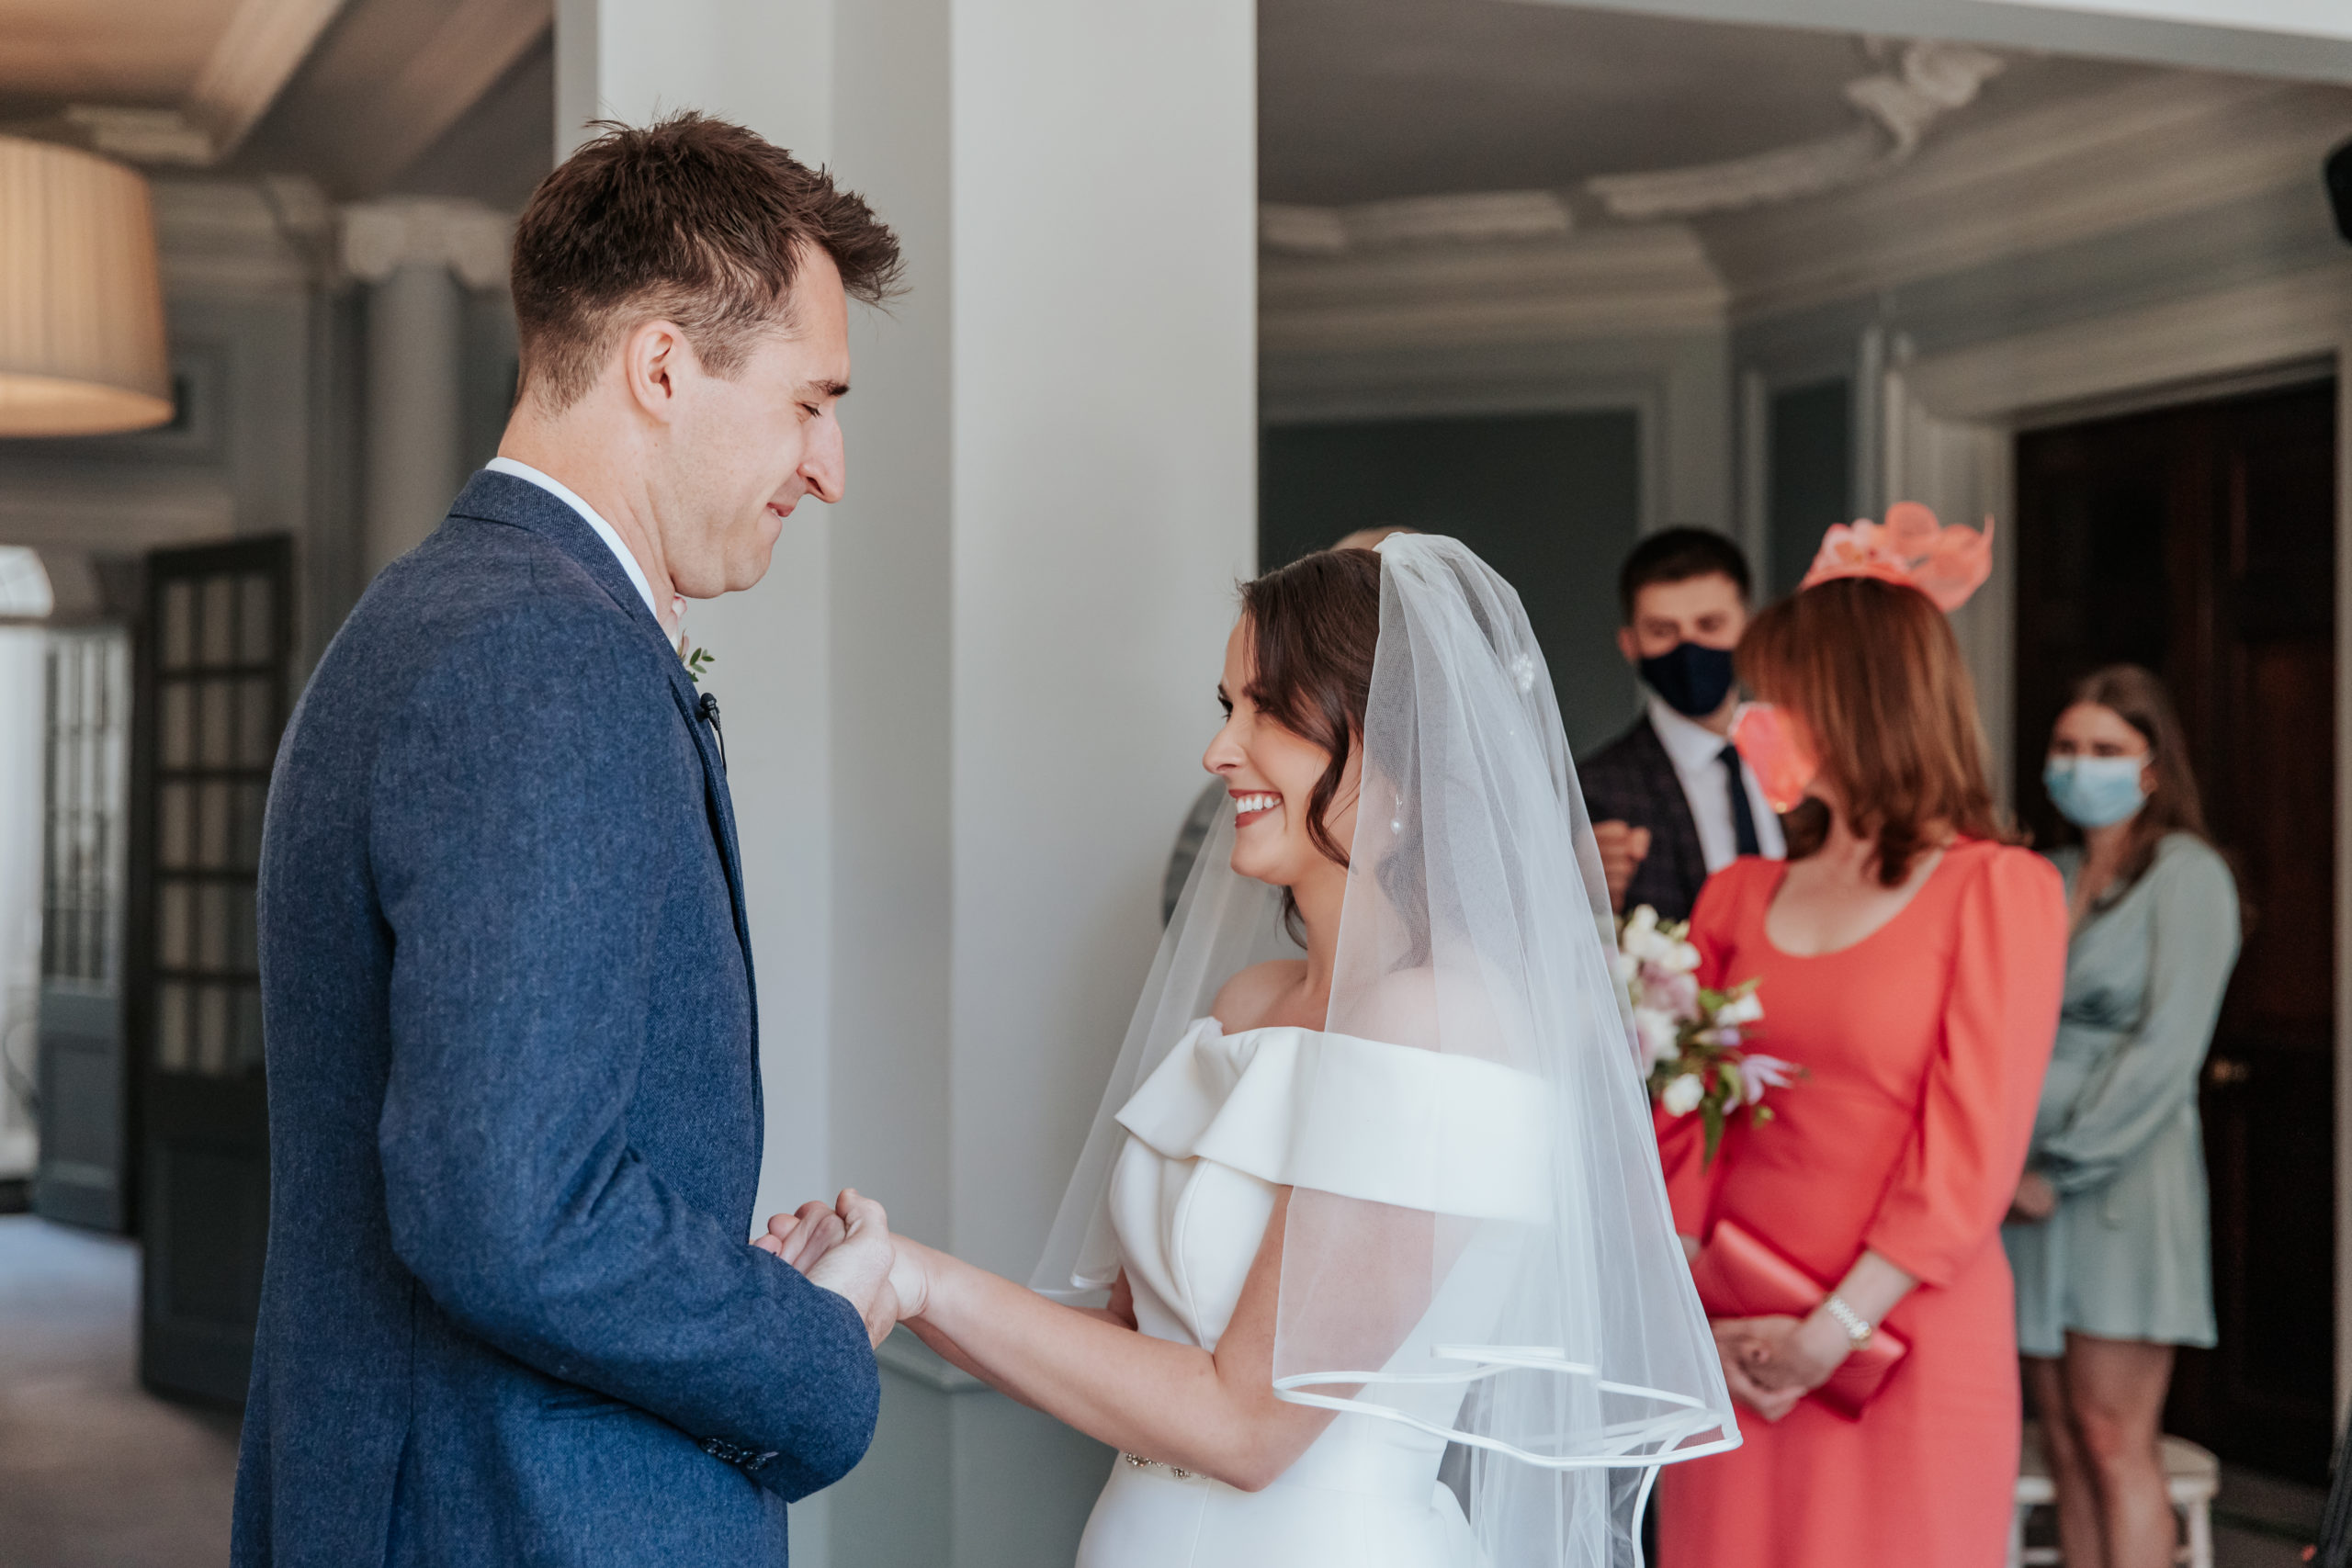 Laura and Stuart hold hands during their wedding